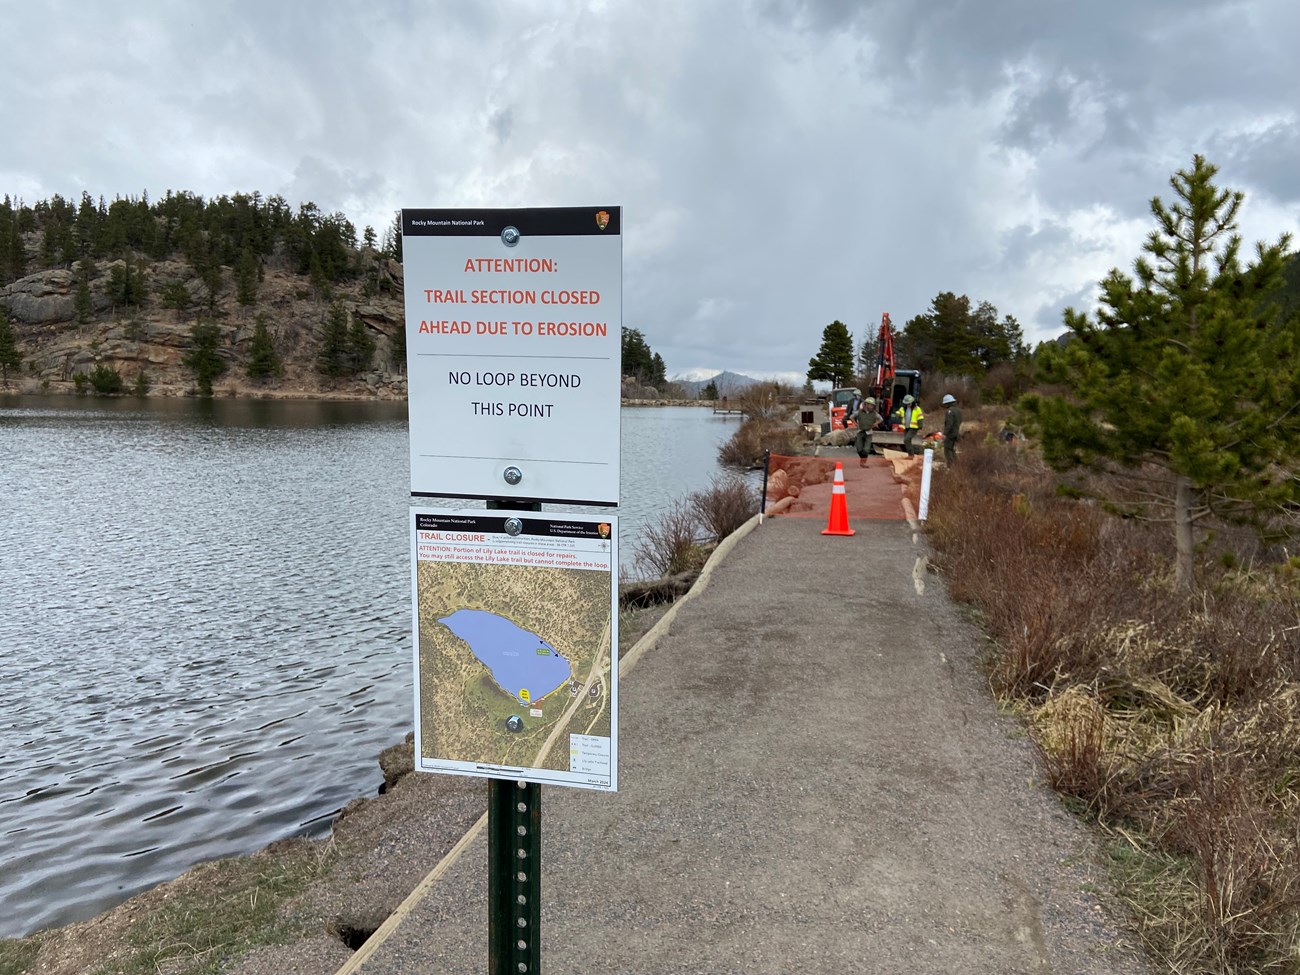 A sign is posted for the Lily Lake Trail Closure. NPS staff are using a bobcat and other equipment to repair the trail.